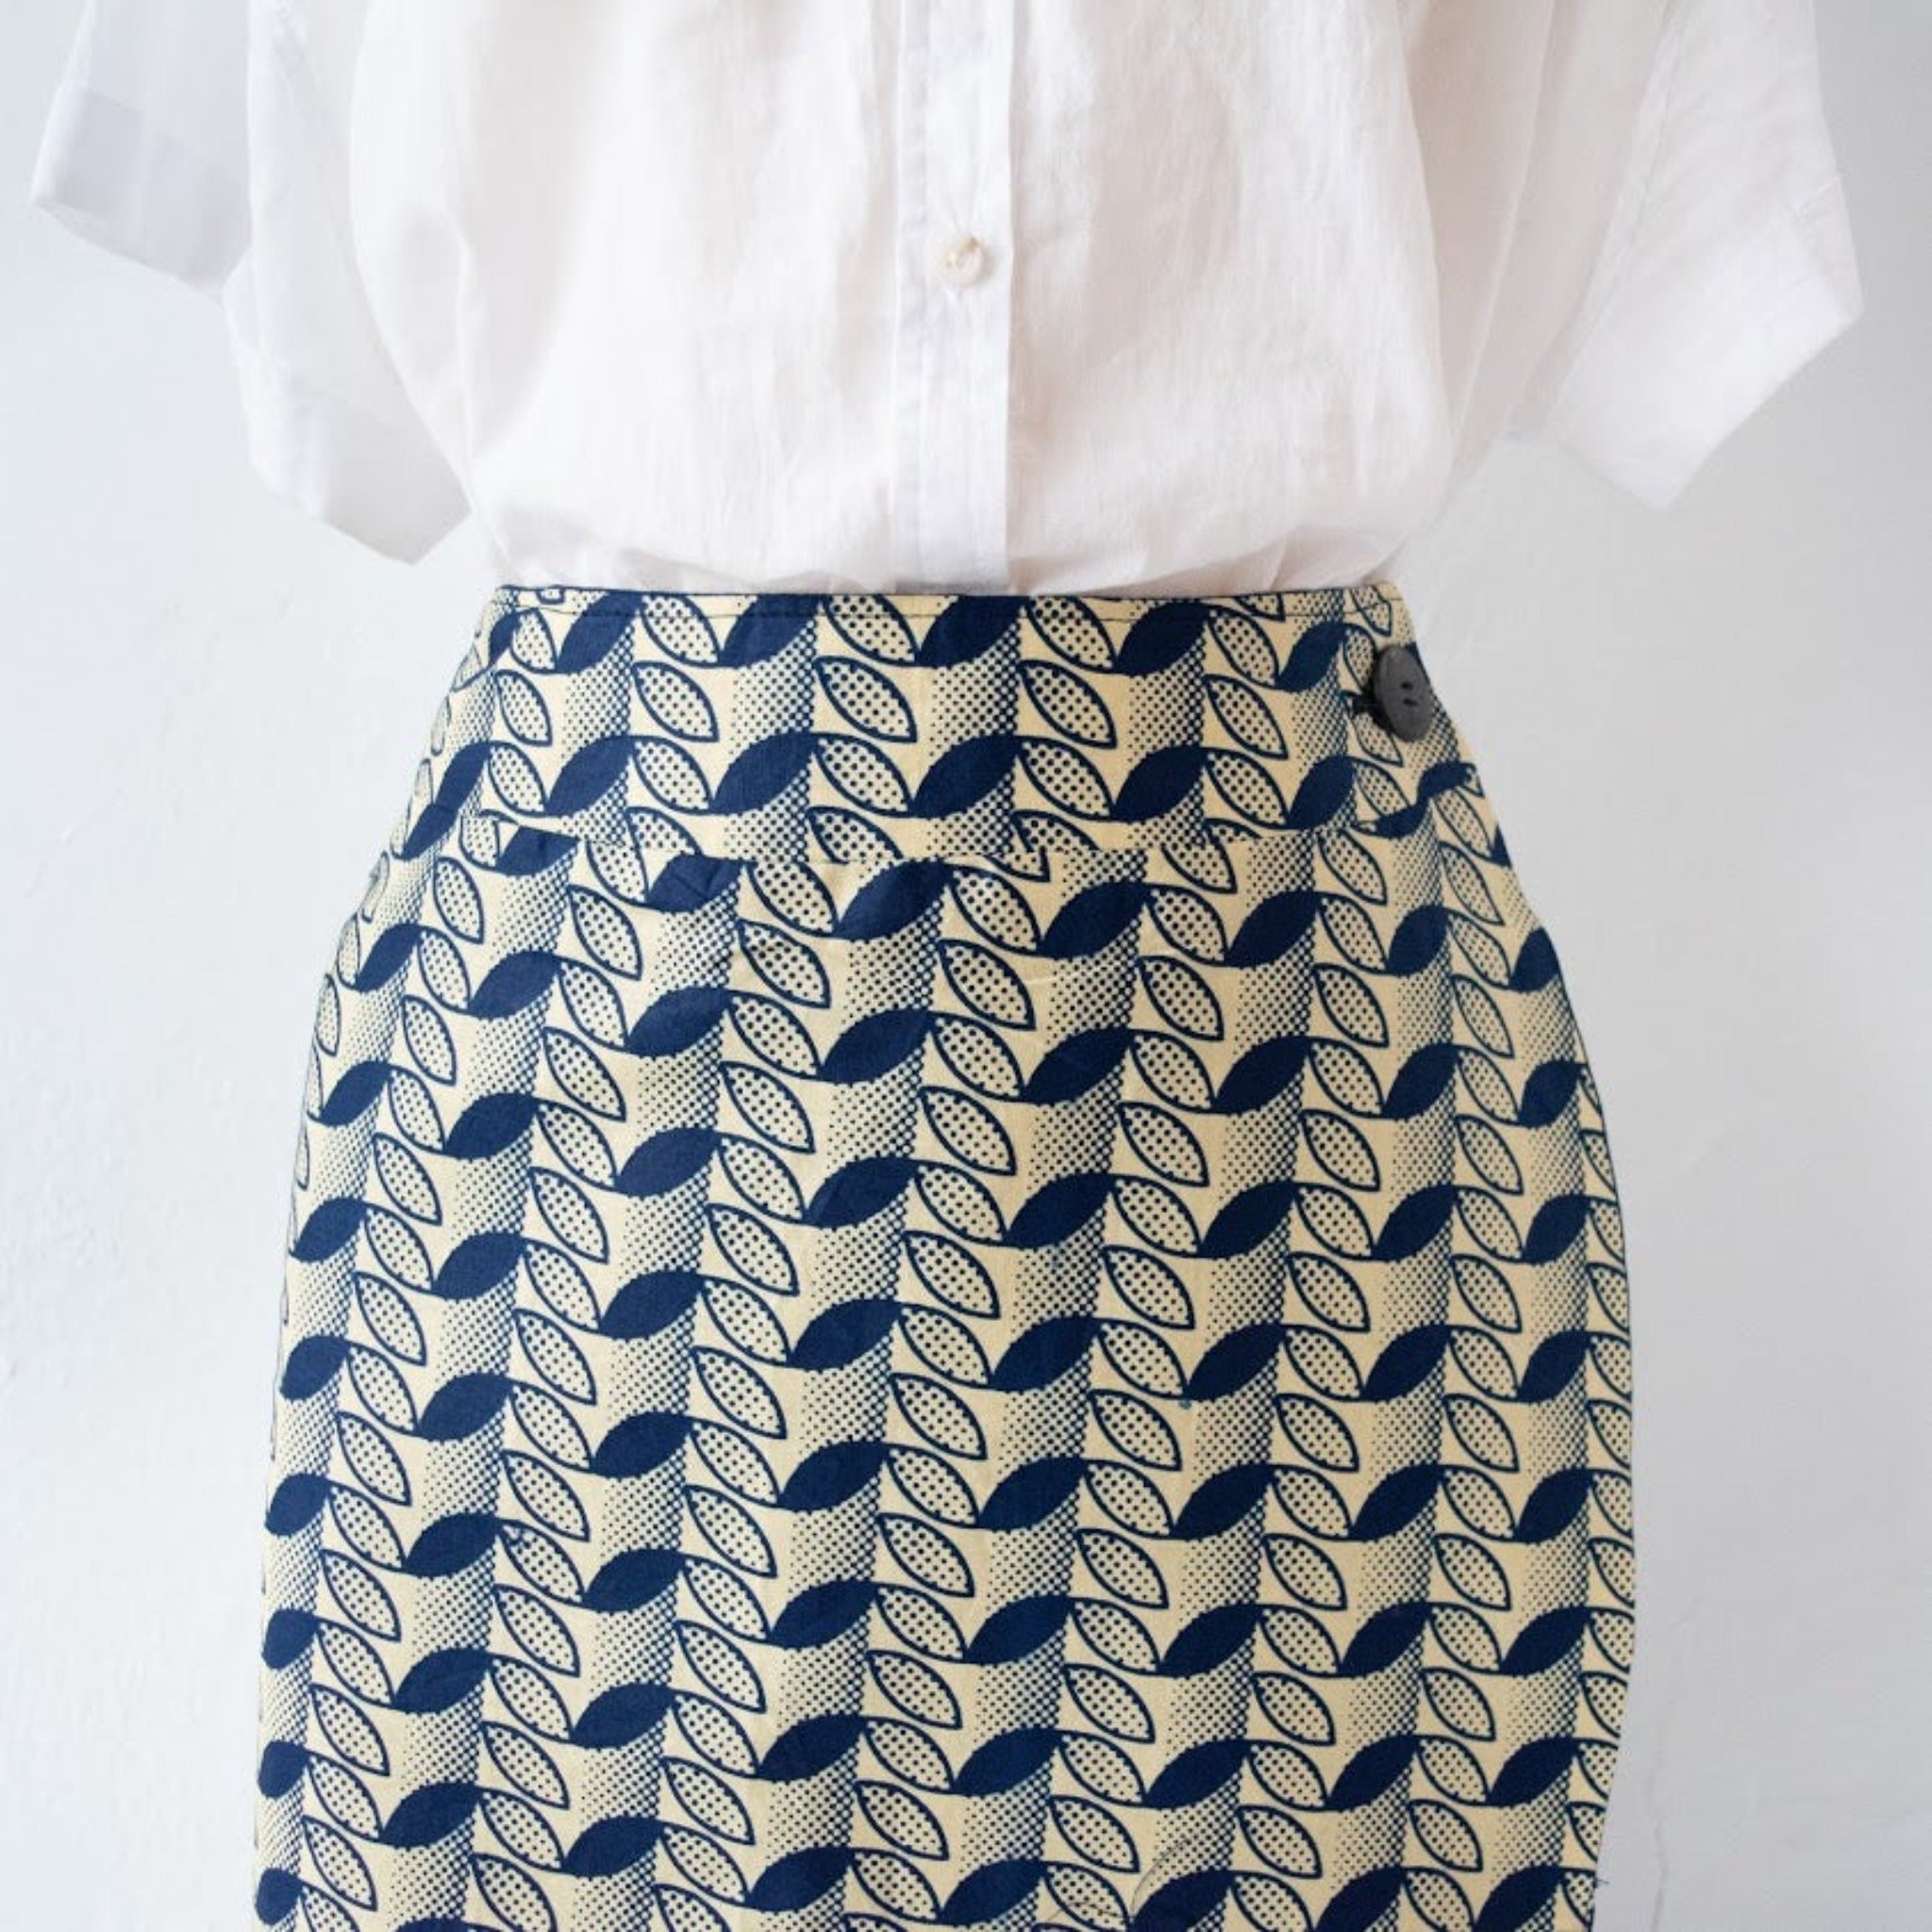 Simple Wrap Skirt - Kenyan materials and design for a fair trade boutique